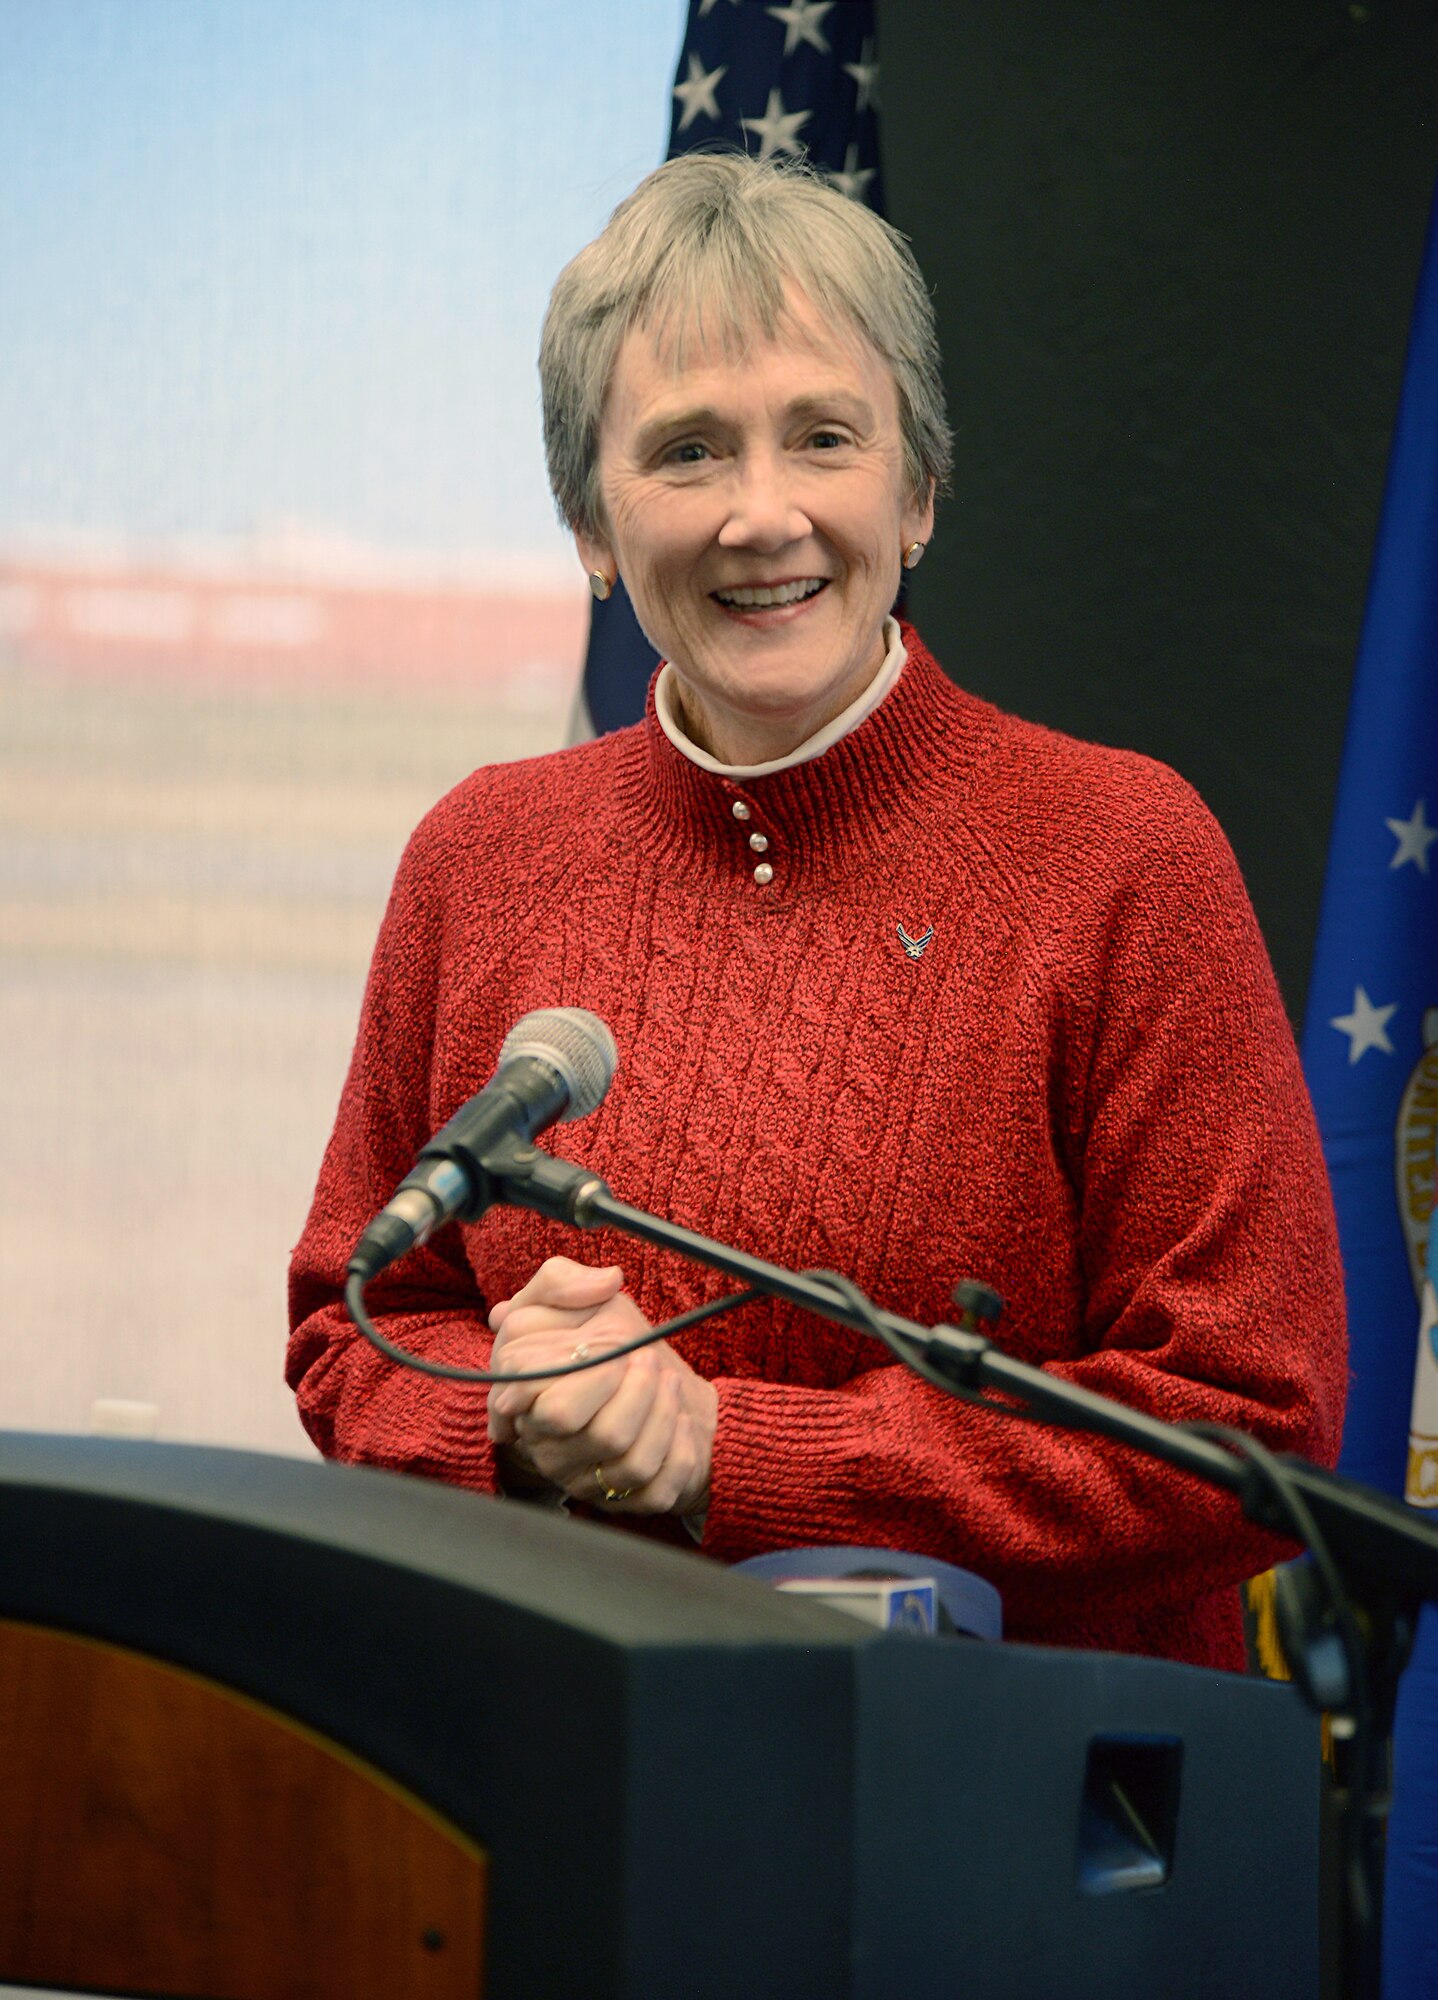 During her visit Nov. 16, Secretary of the Air Force Heather Wilson announced that Tinker Air Force Base has been chosen as the future site for depot maintenance and sustainment of the B-21 Raider, the next generation long-range strike bomber. Wilson is shown at the podium during the announcement.